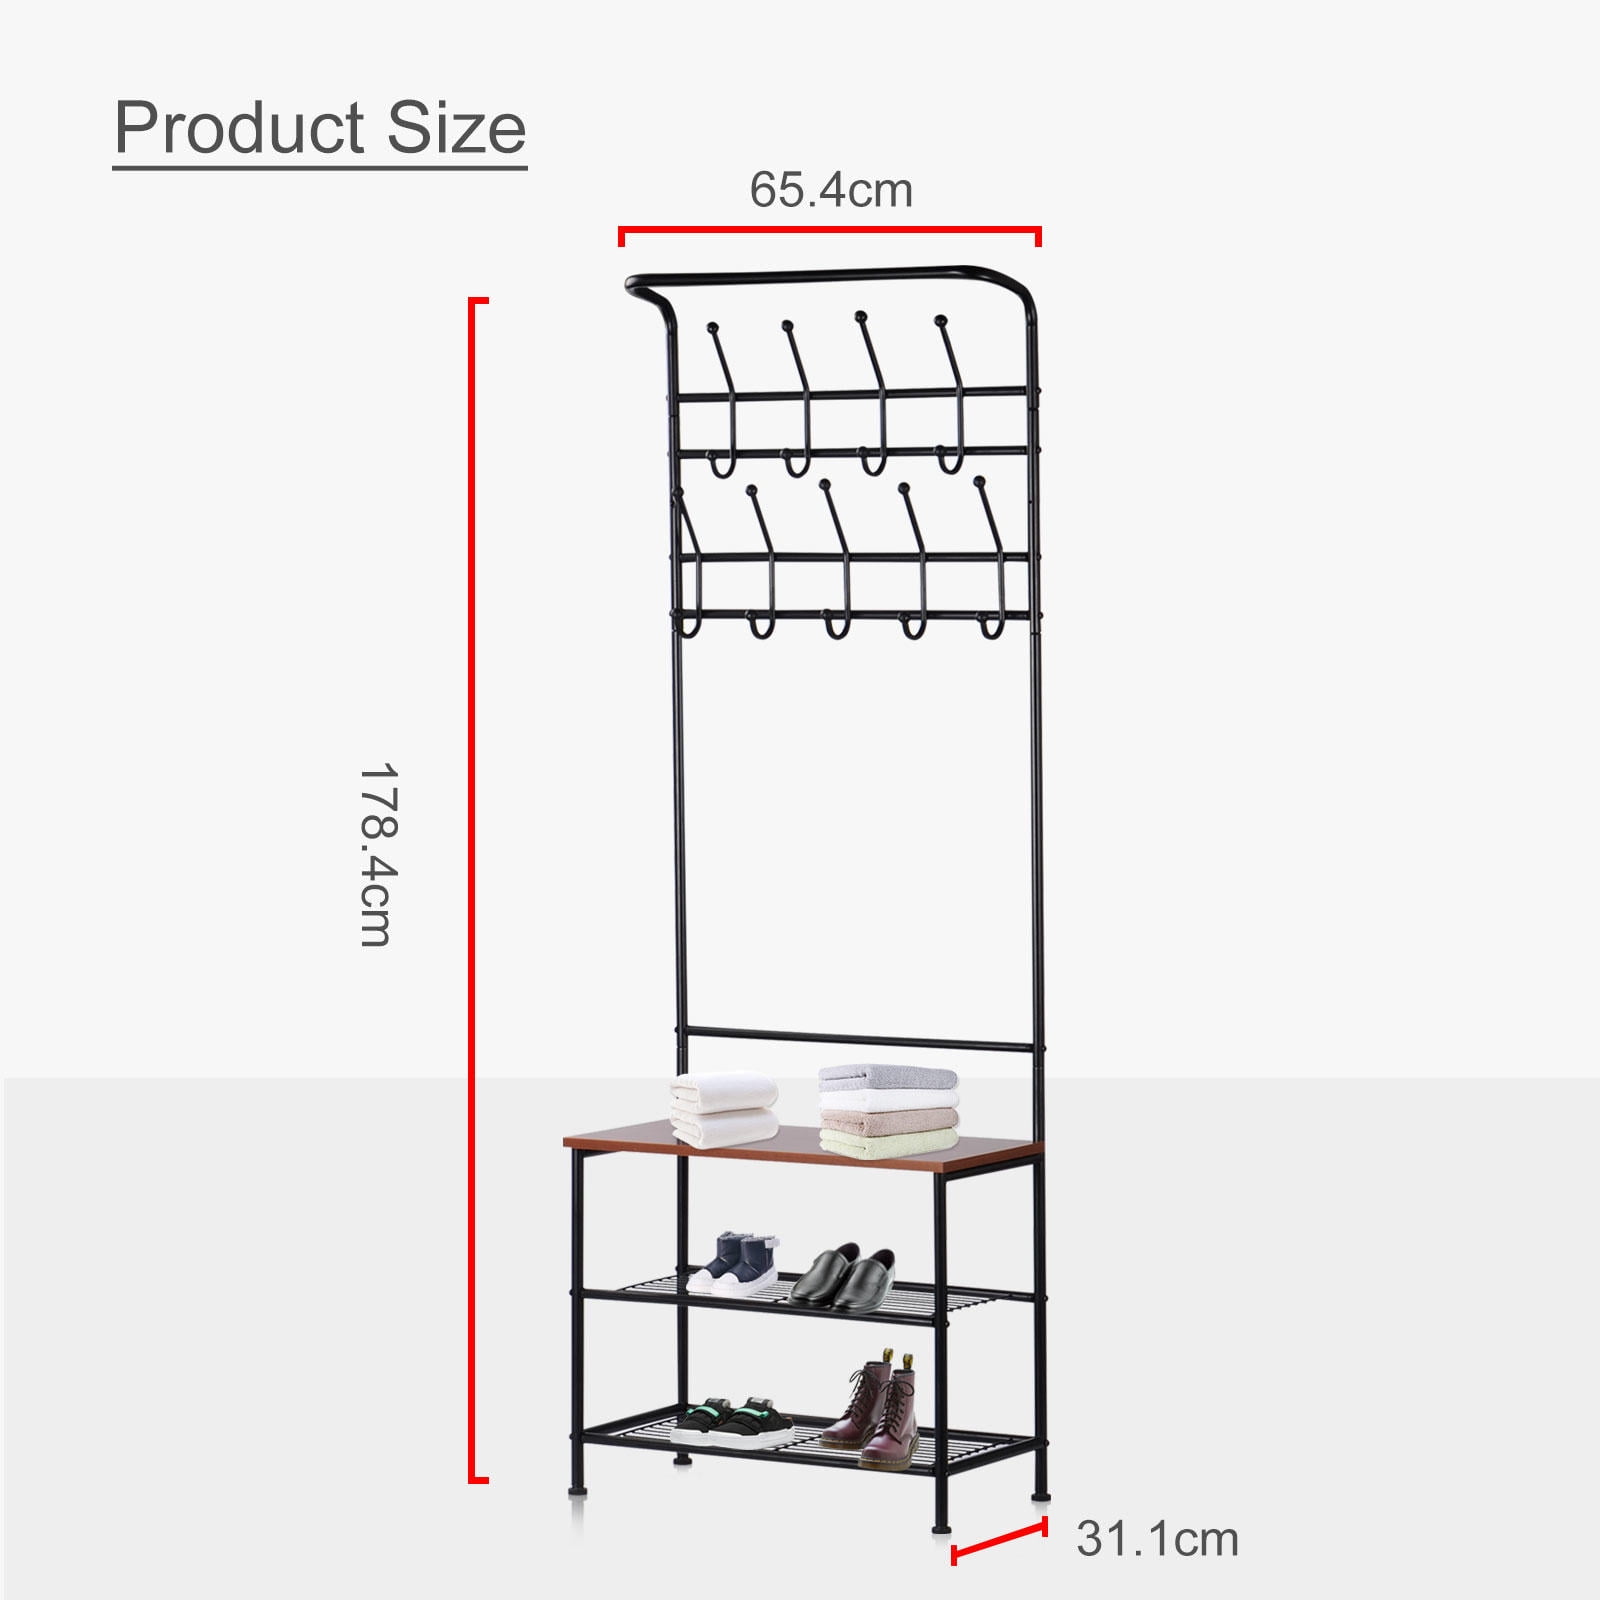 for Entryway IBUYKE Coat Rack Shoe Bench 71.2 inches Clothes Rack Living Room UTMJ086H Coat Rack with Shoe Bench Industrial Garment Racks Hall Tree with 2 Cube Storage Shelf